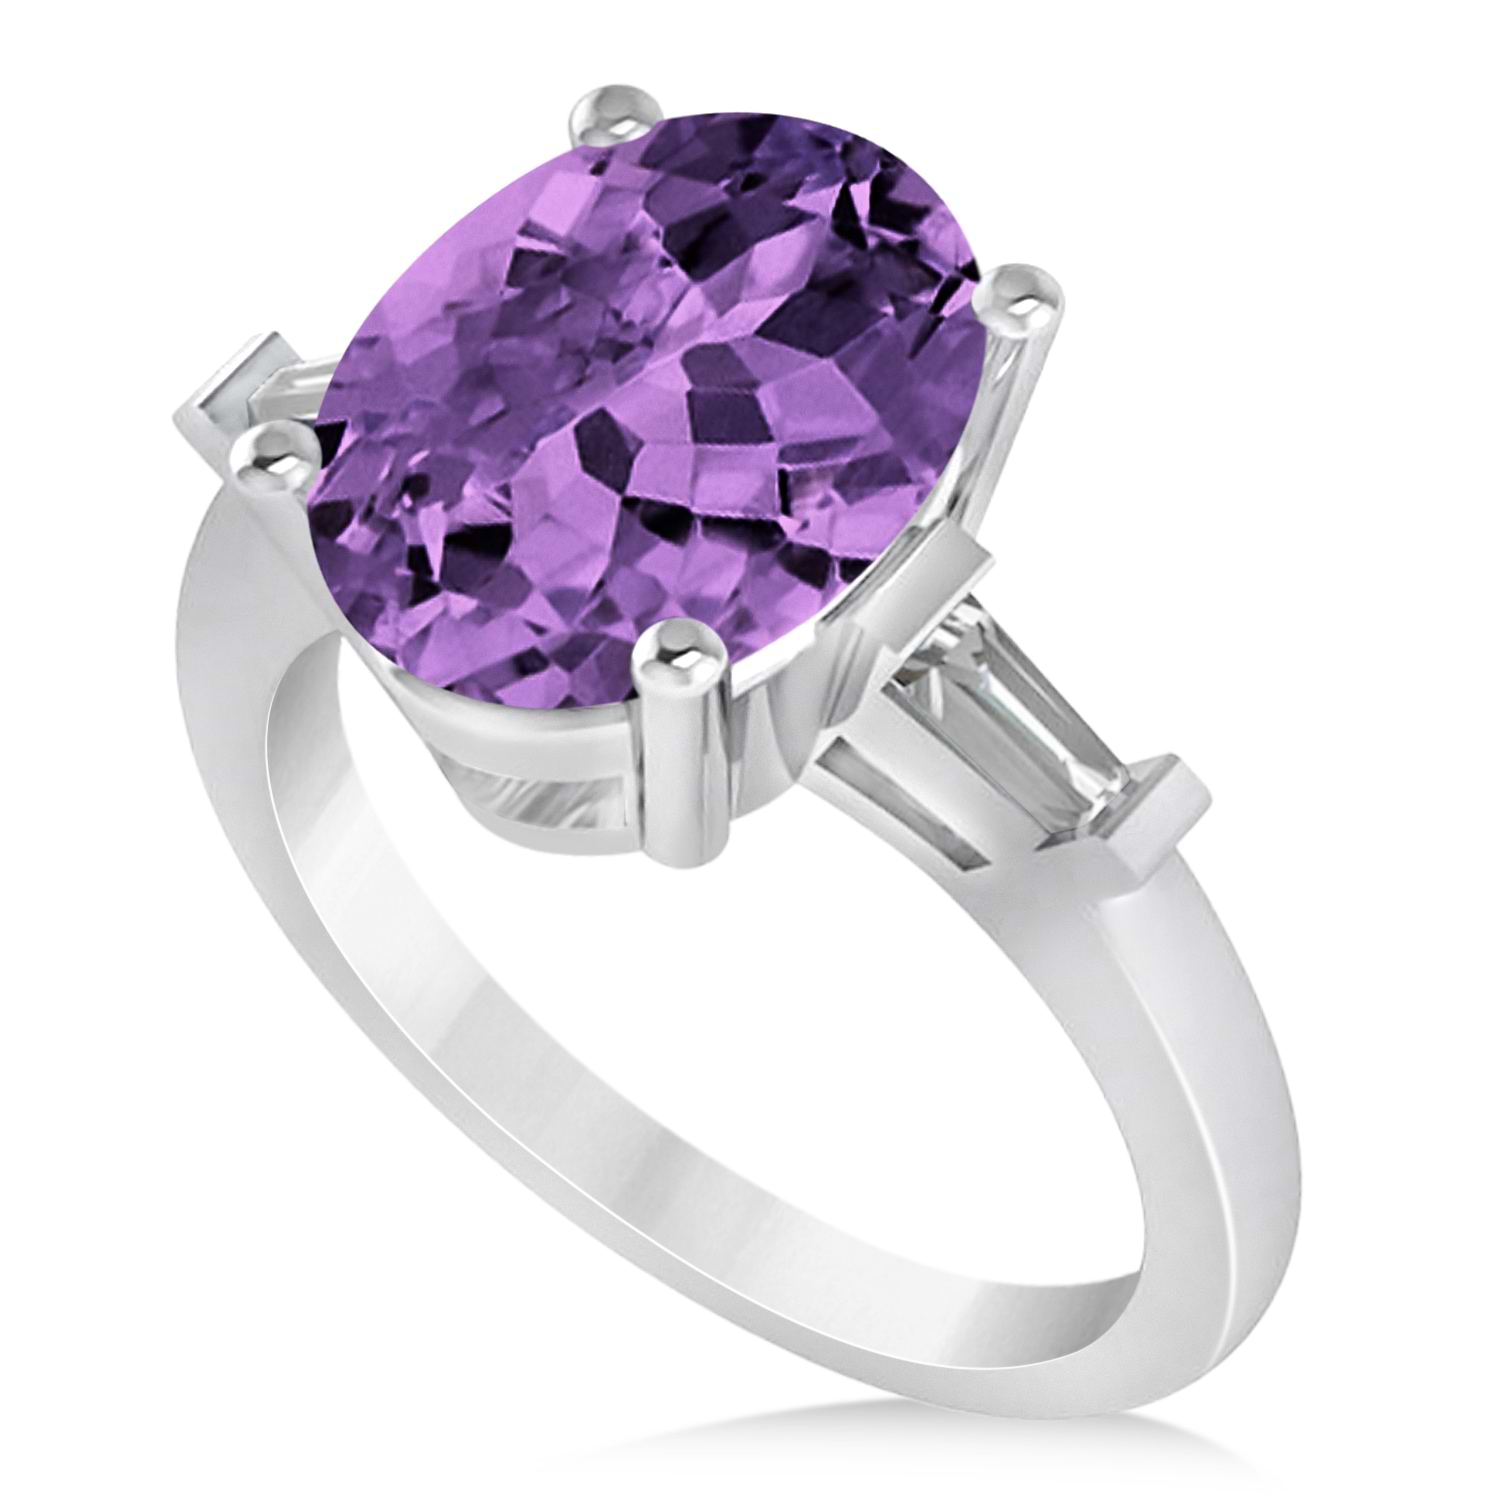 Oval & Baguette Cut Amethyst Engagement Ring 14k White Gold (3.30ct)